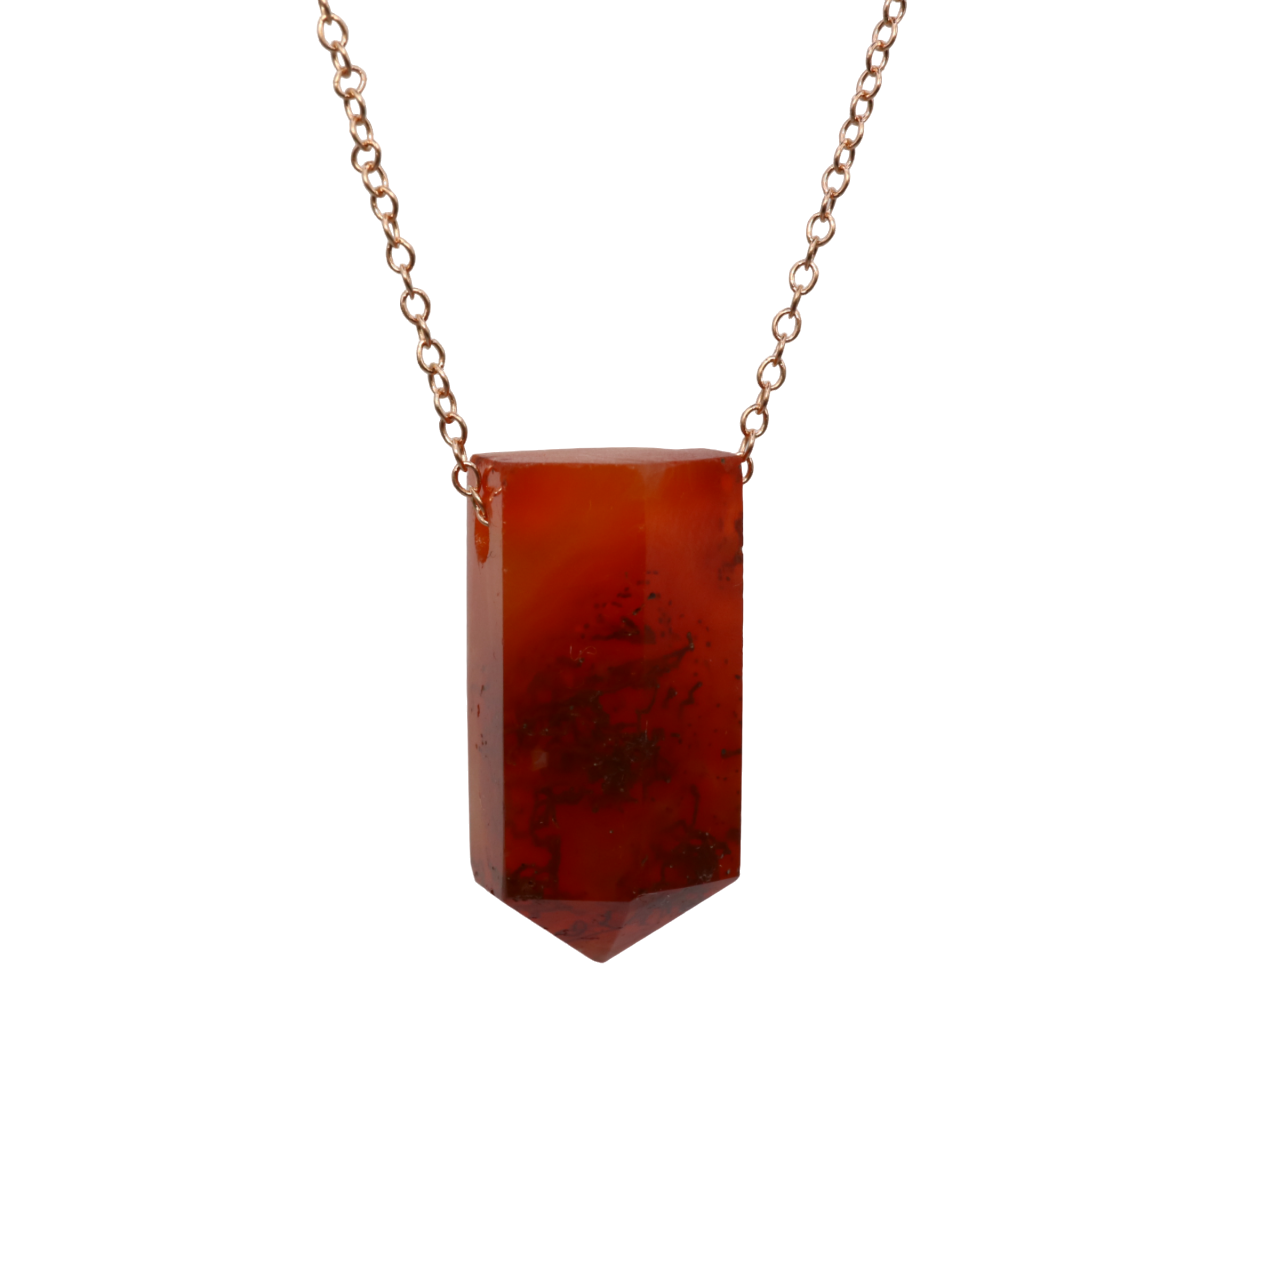 Carnelian on a fine Rose Gold plated 925 Sterling Silver chain